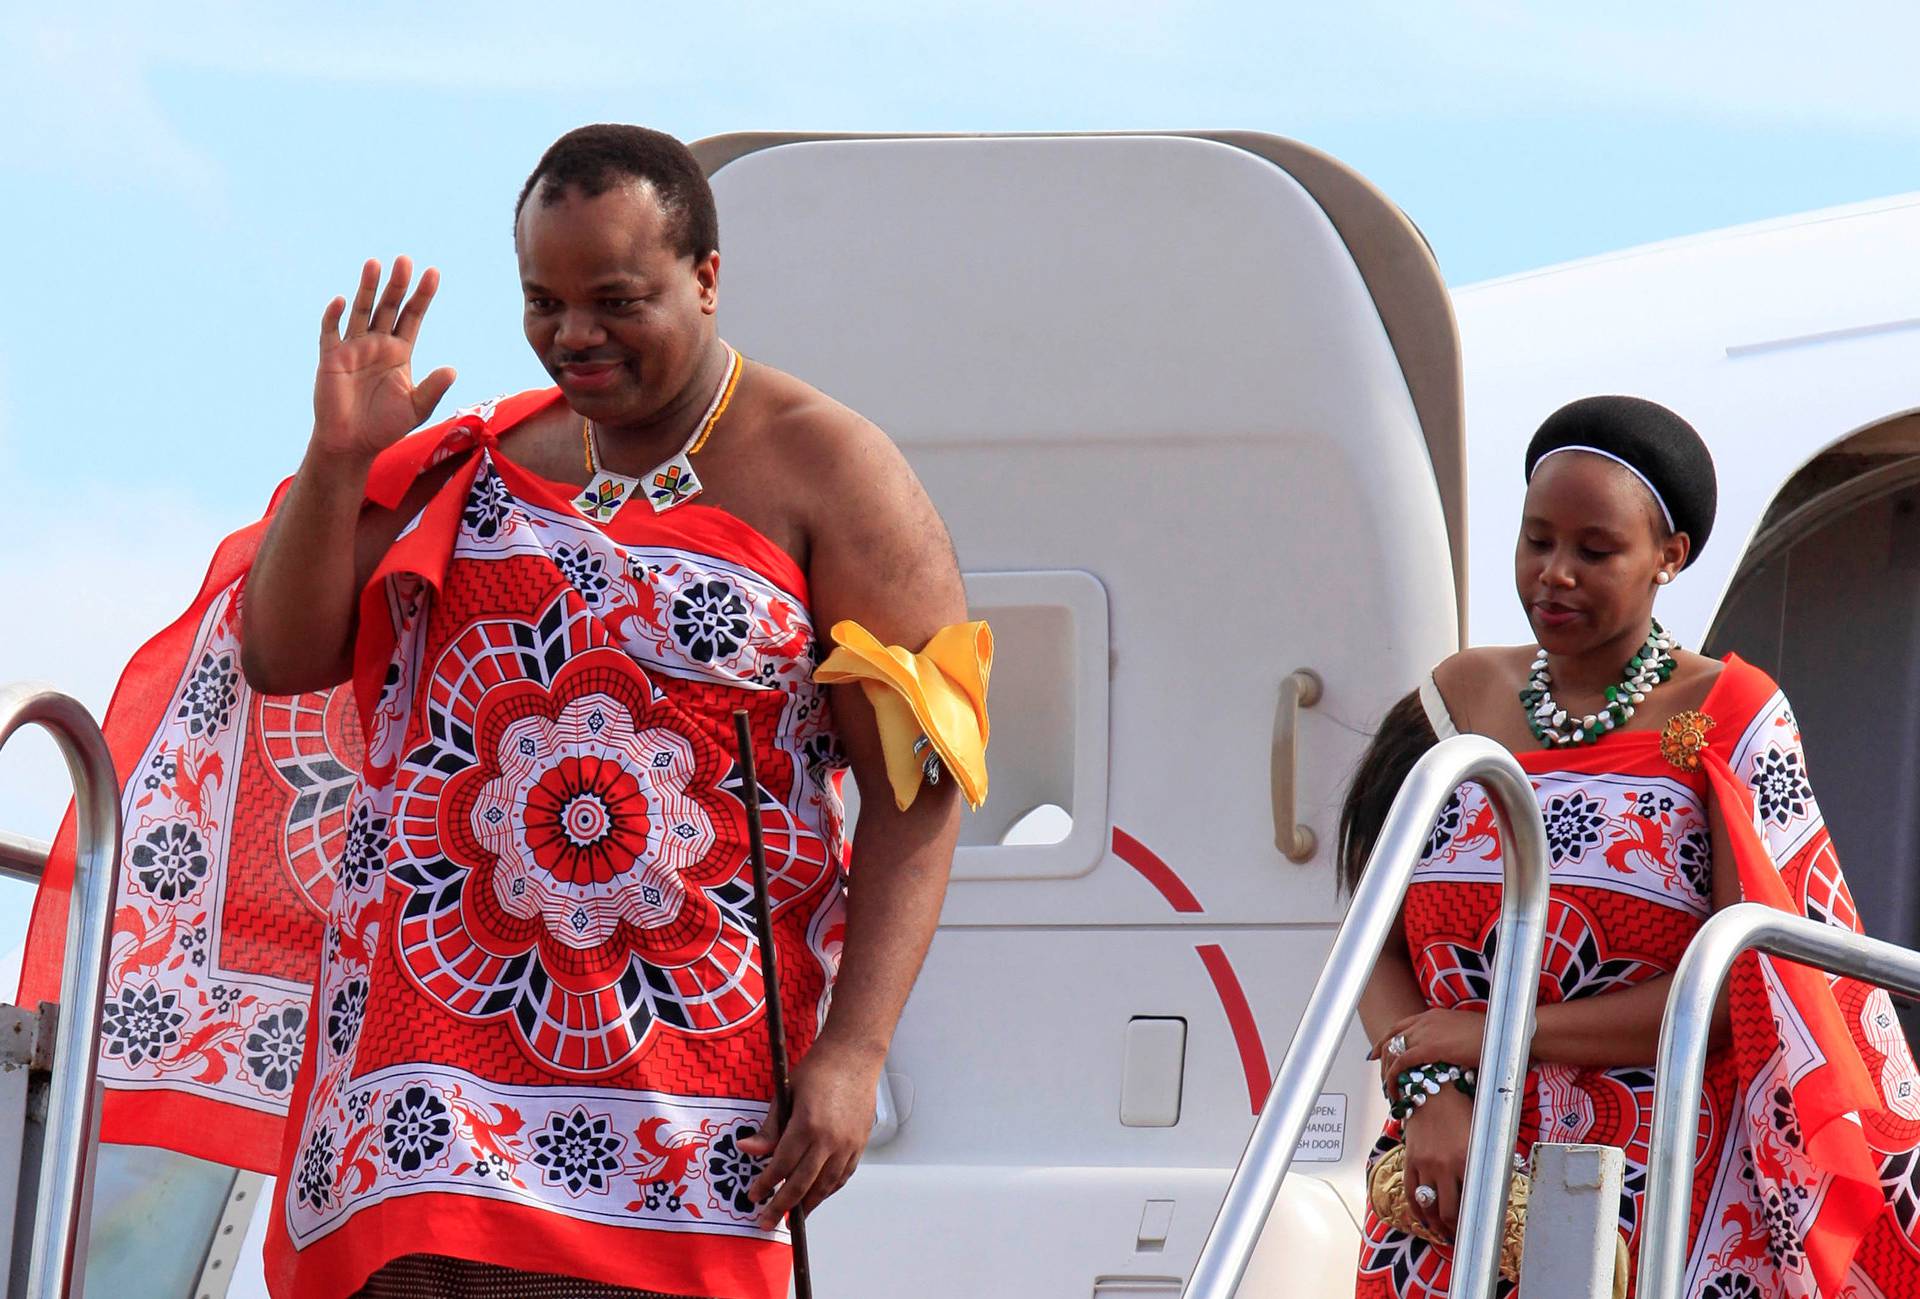 FILE PHOTO: King of Swaziland Mswati iii and his wife disembark a plane after arriving at Katunayake International airport in Colombo